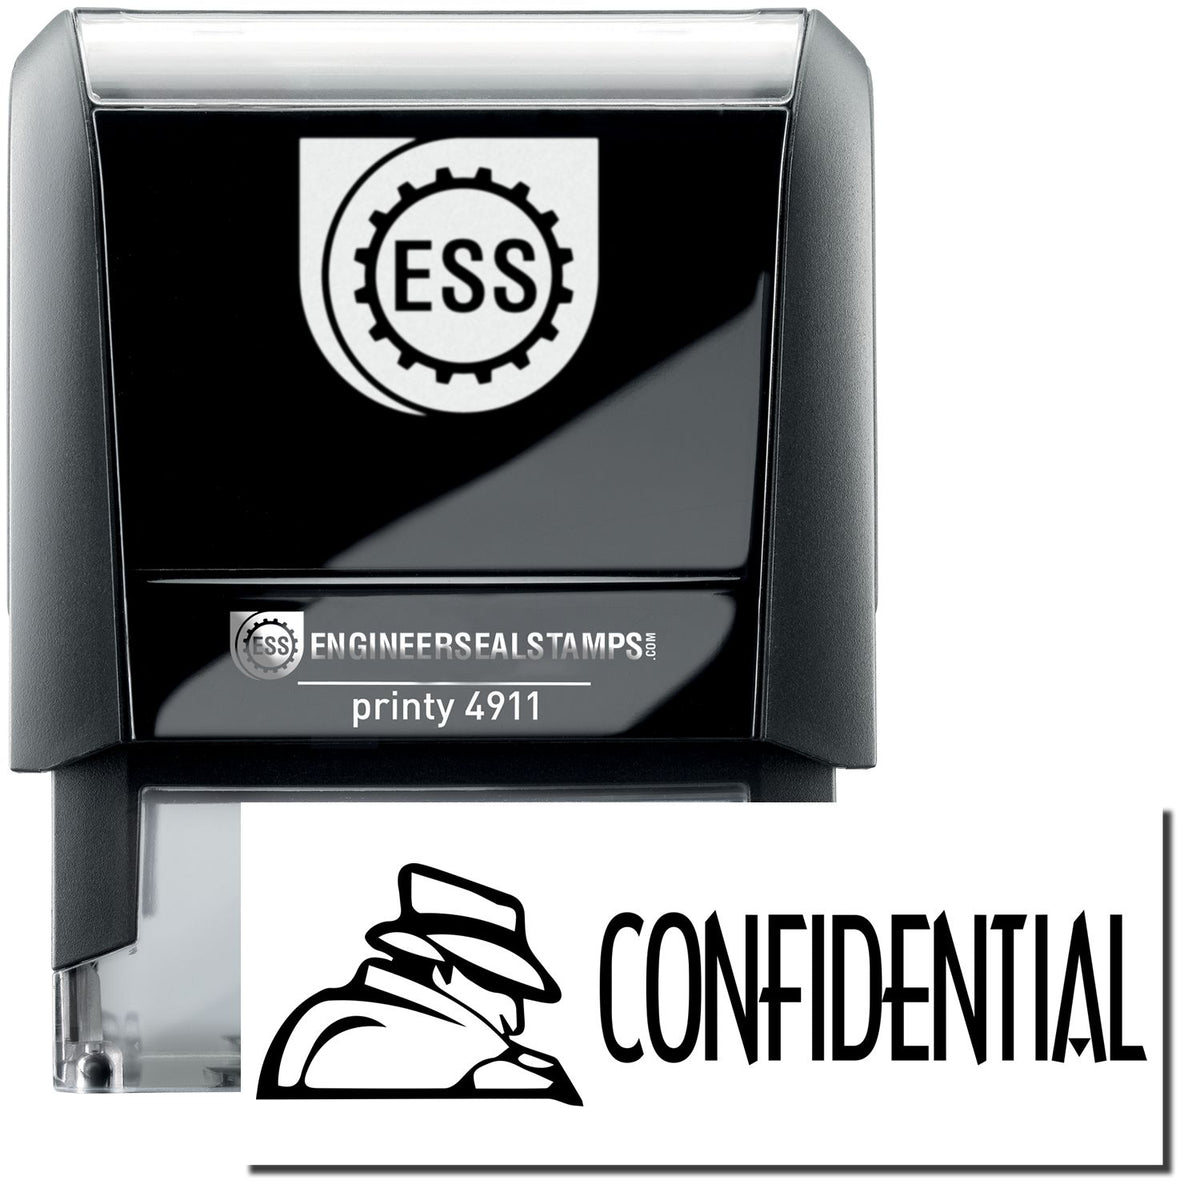 A self-inking stamp with a stamped image showing how the text &quot;CONFIDENTIAL&quot; with an eye-catching logo on the left side is displayed after stamping.